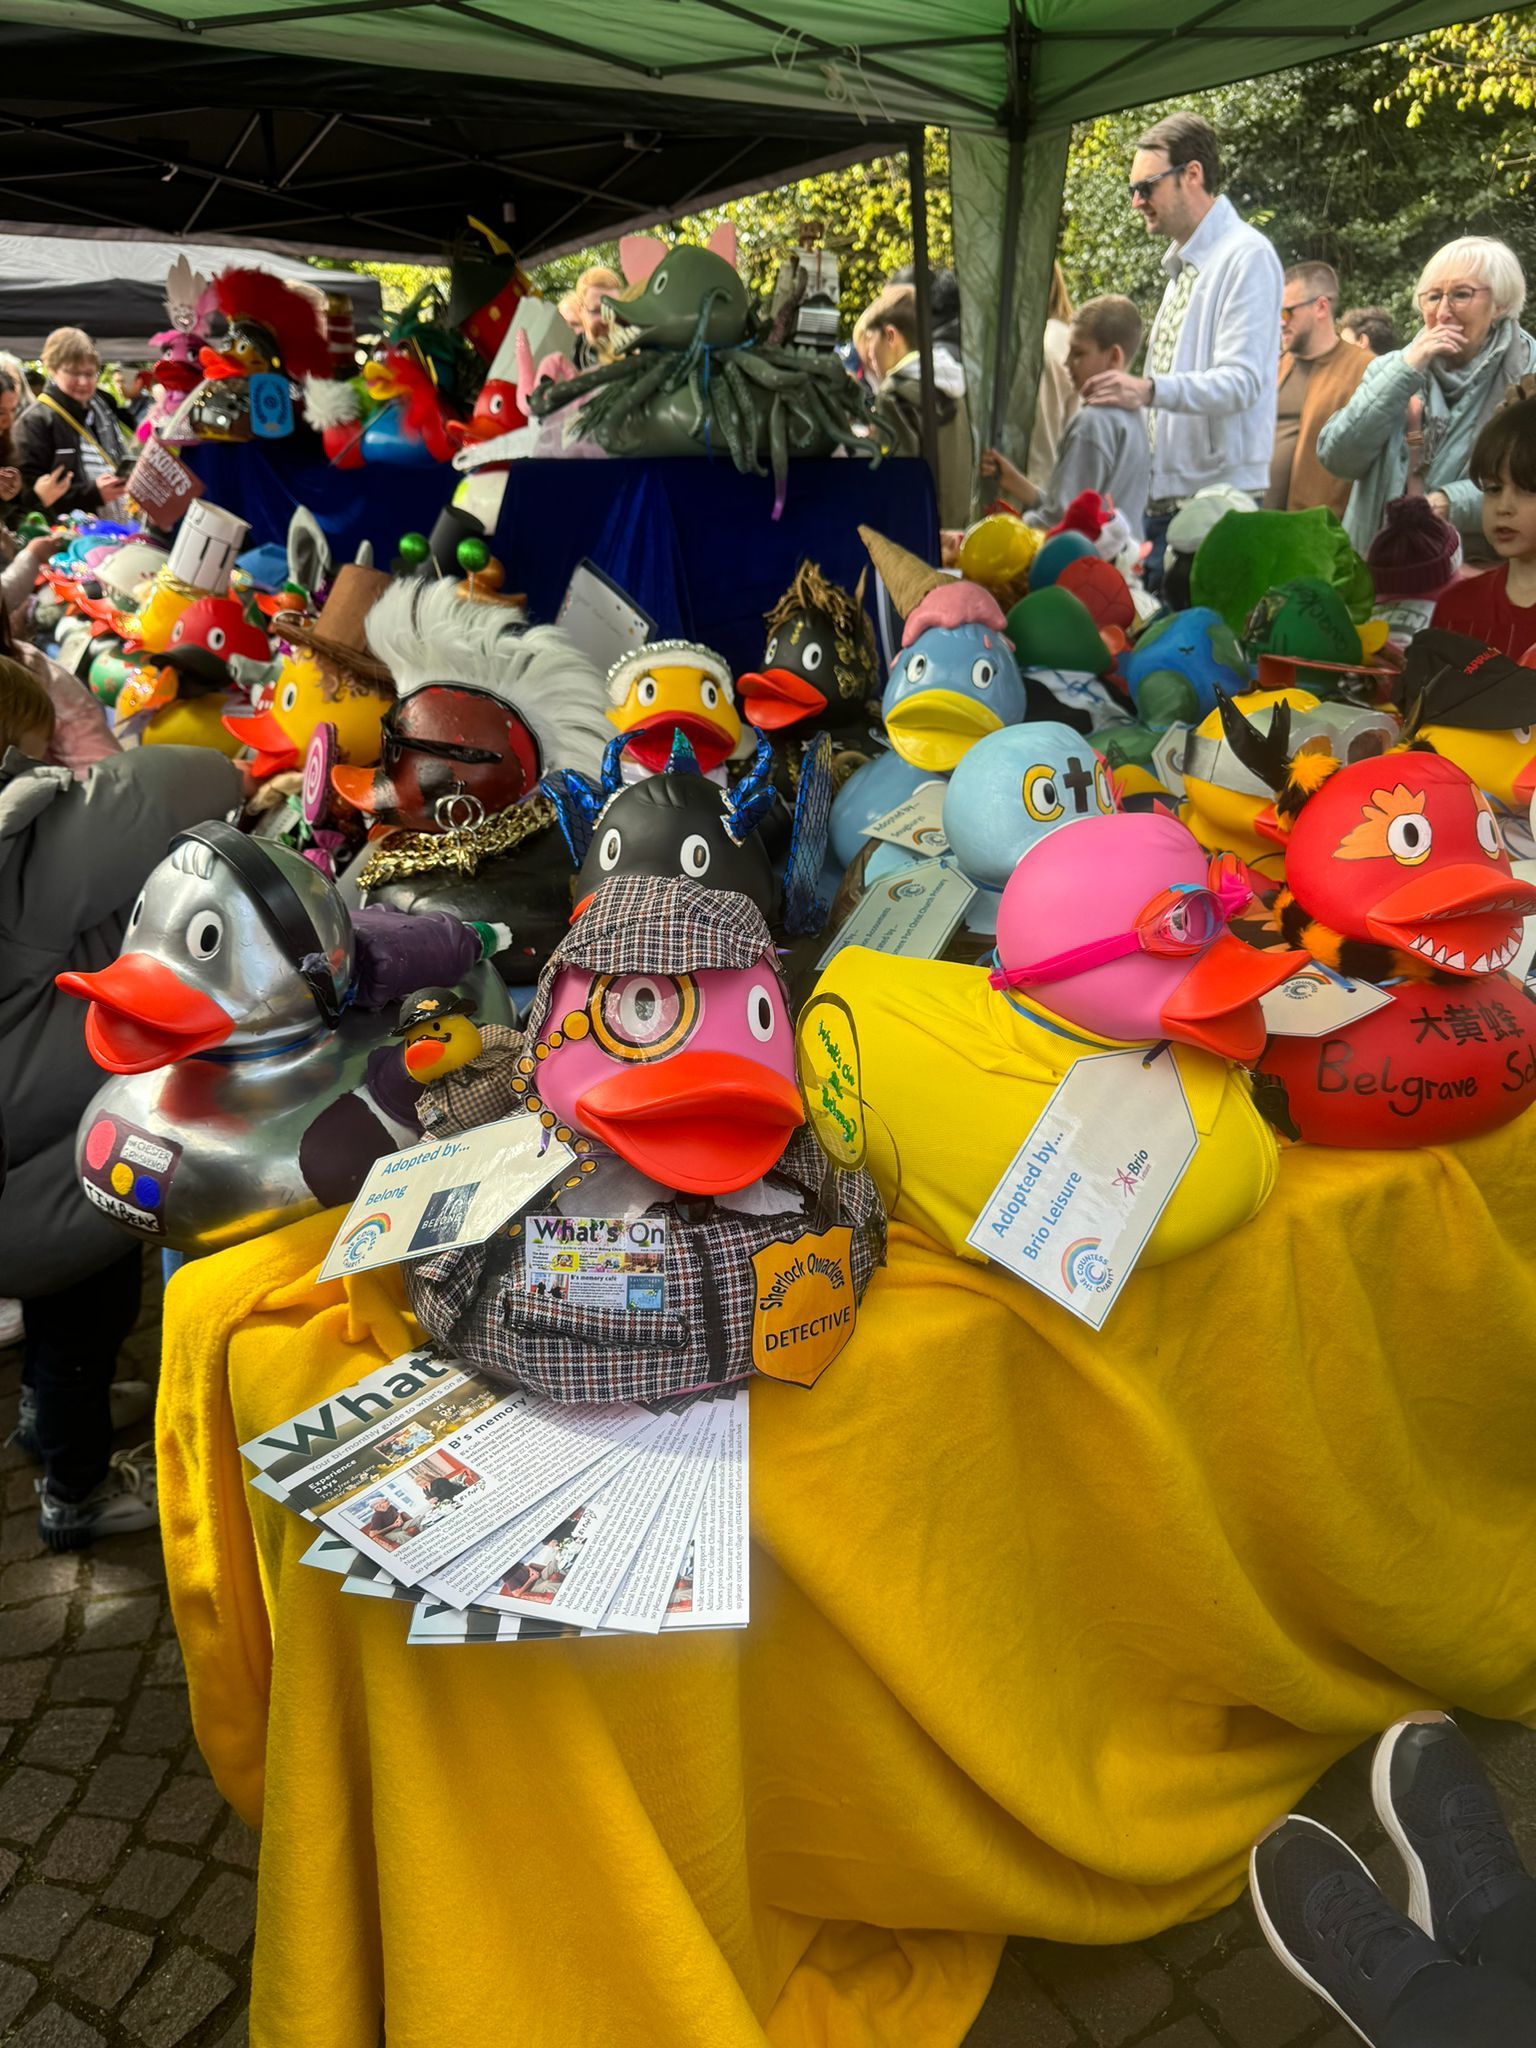 Sherlock Quackers from Belong Chester care village among other competitor ducks.